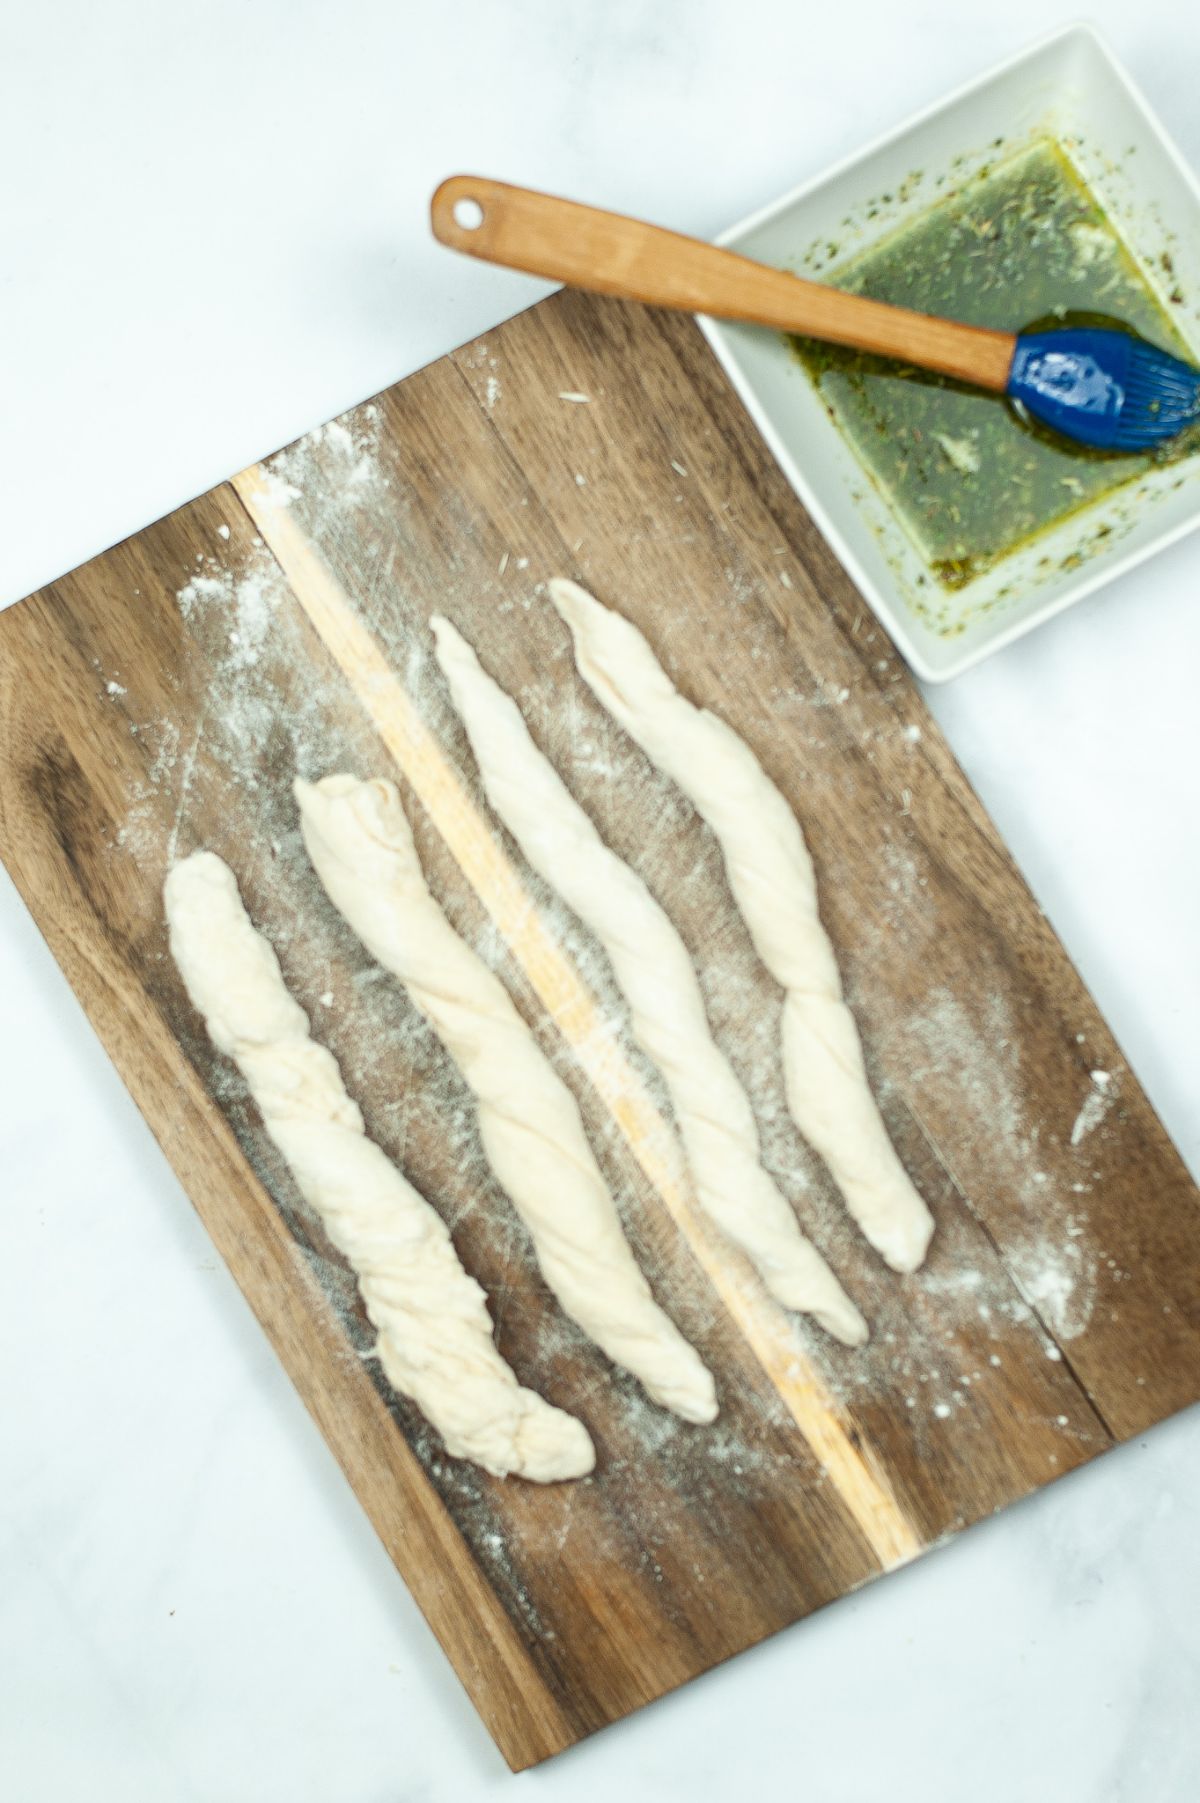 Twisted dough to make breadsticks on a wooden board next to melted butter and herbs in a white bowl with a pastry brush